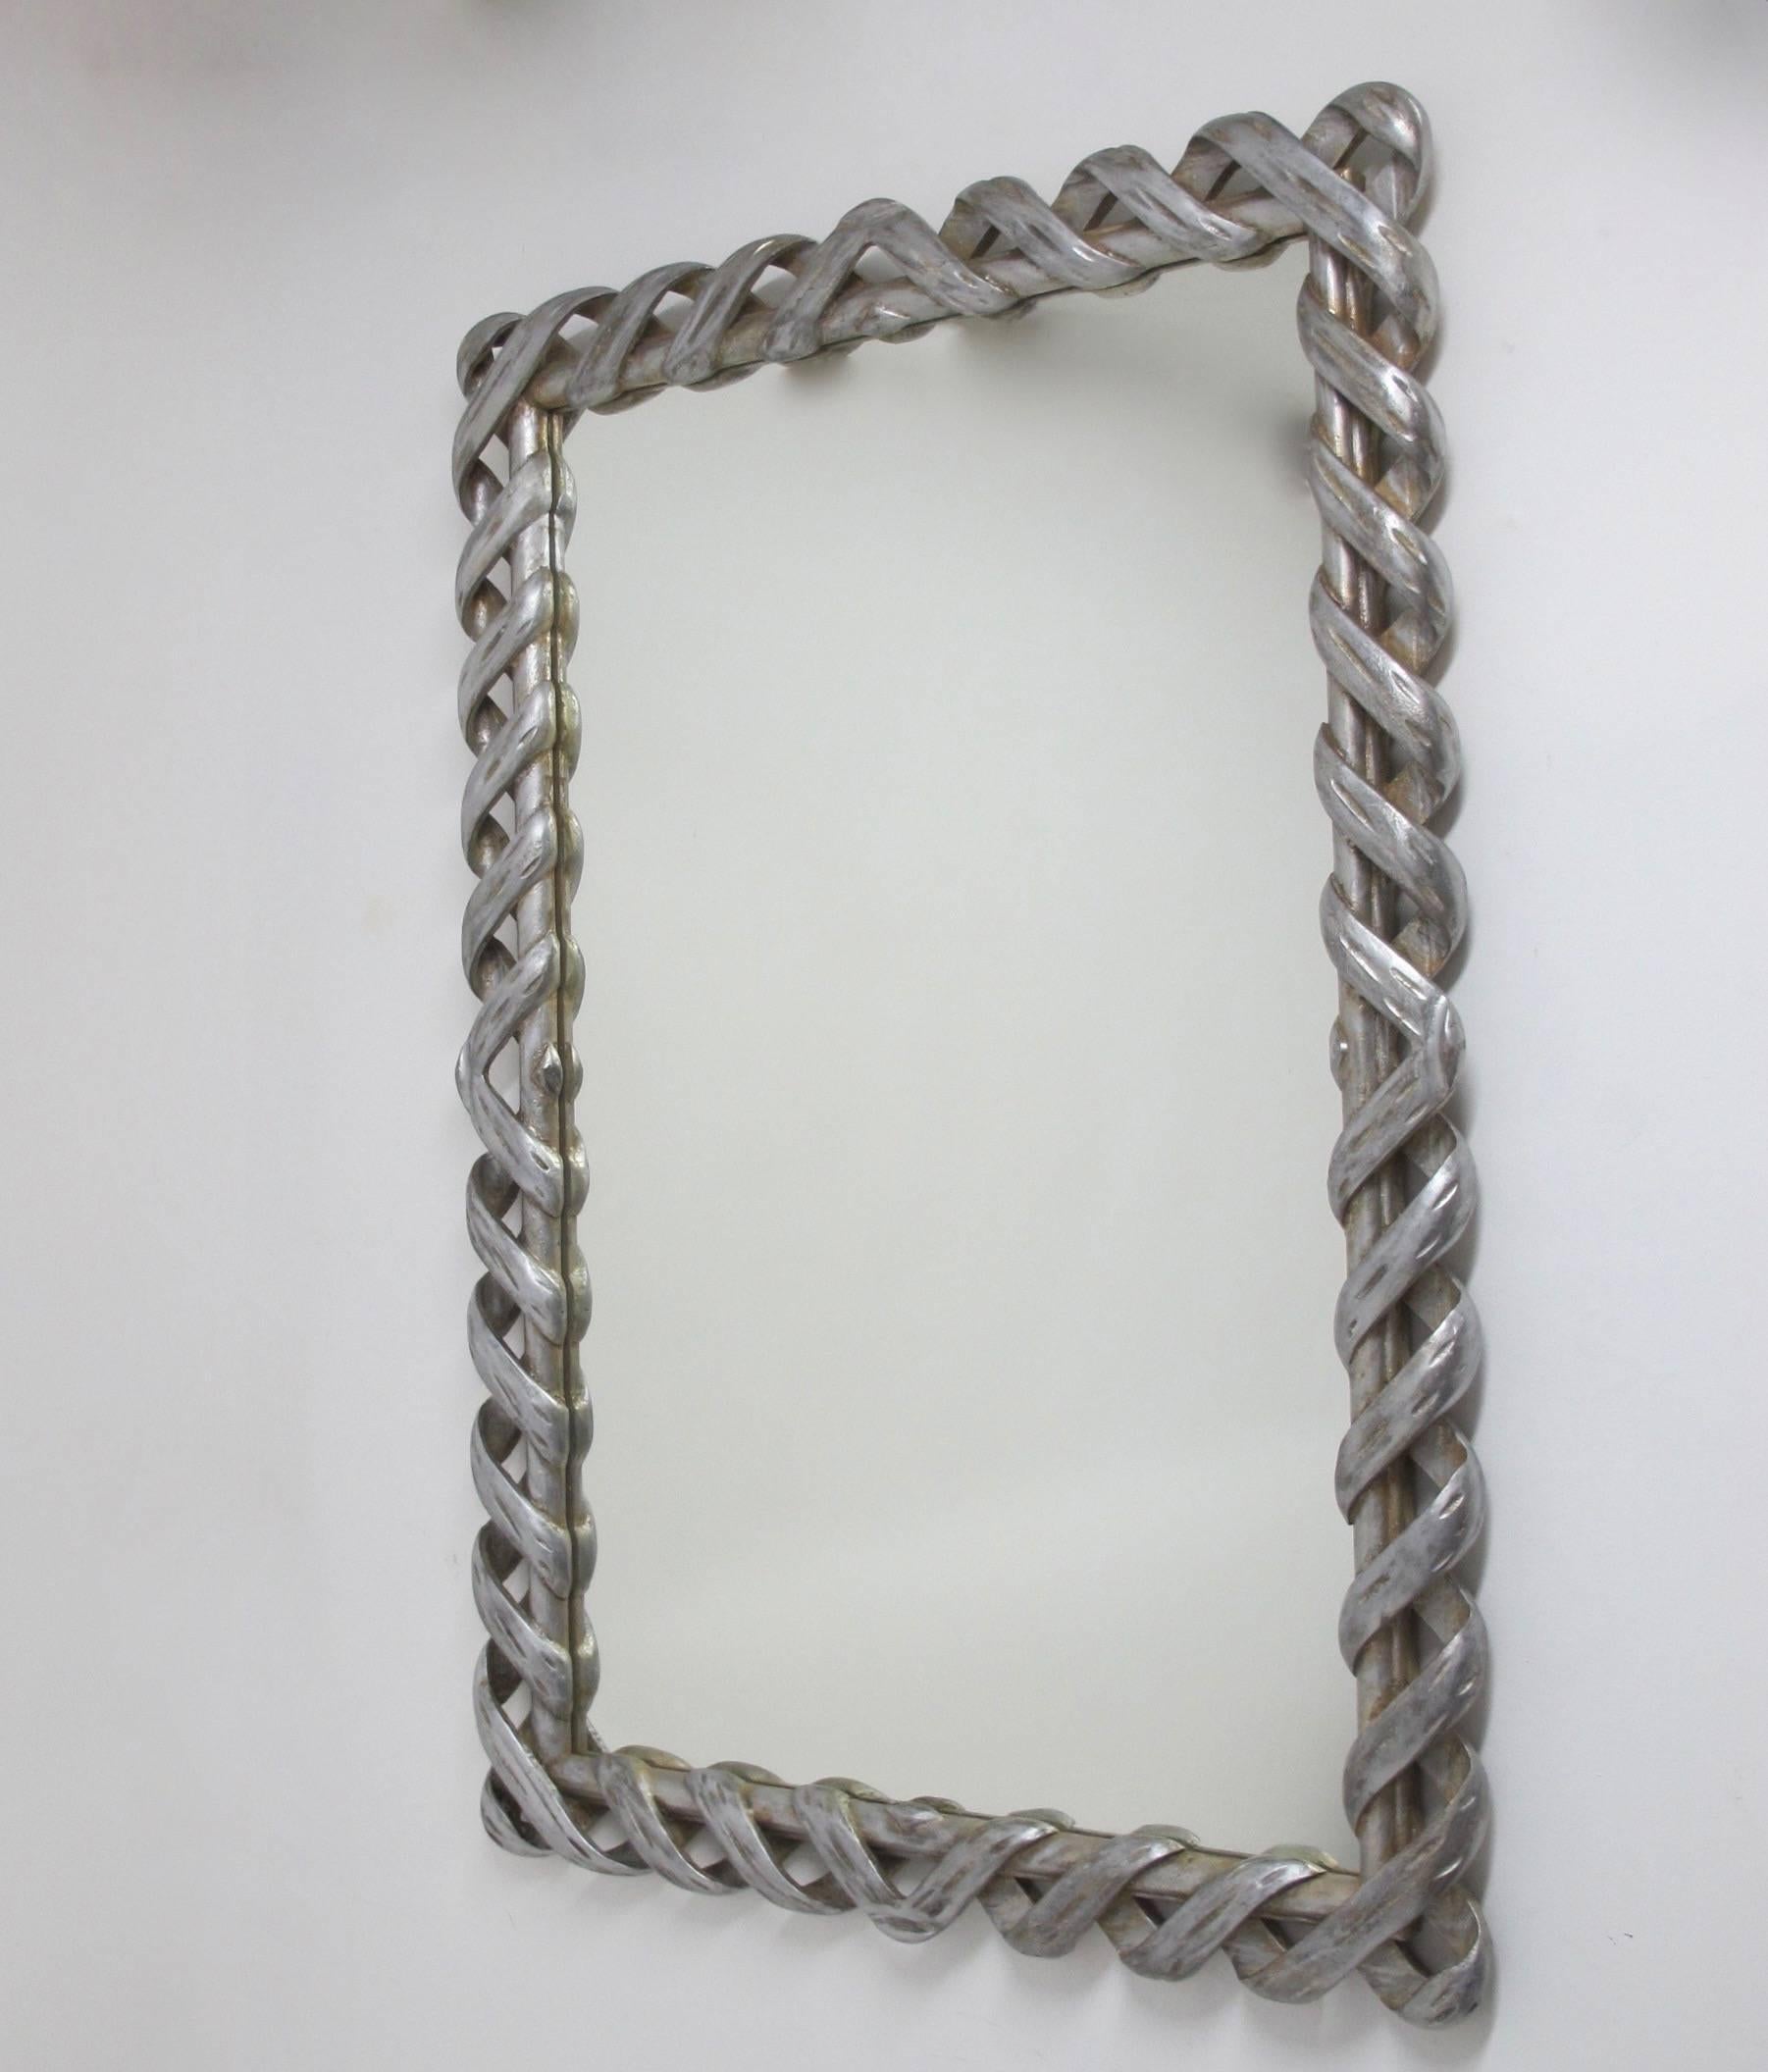 A large and highly unusual carved and silvered wood mirror, Italian, 1950s-1960s. Can hang vertical or horizontal. Newer replaced mirror.